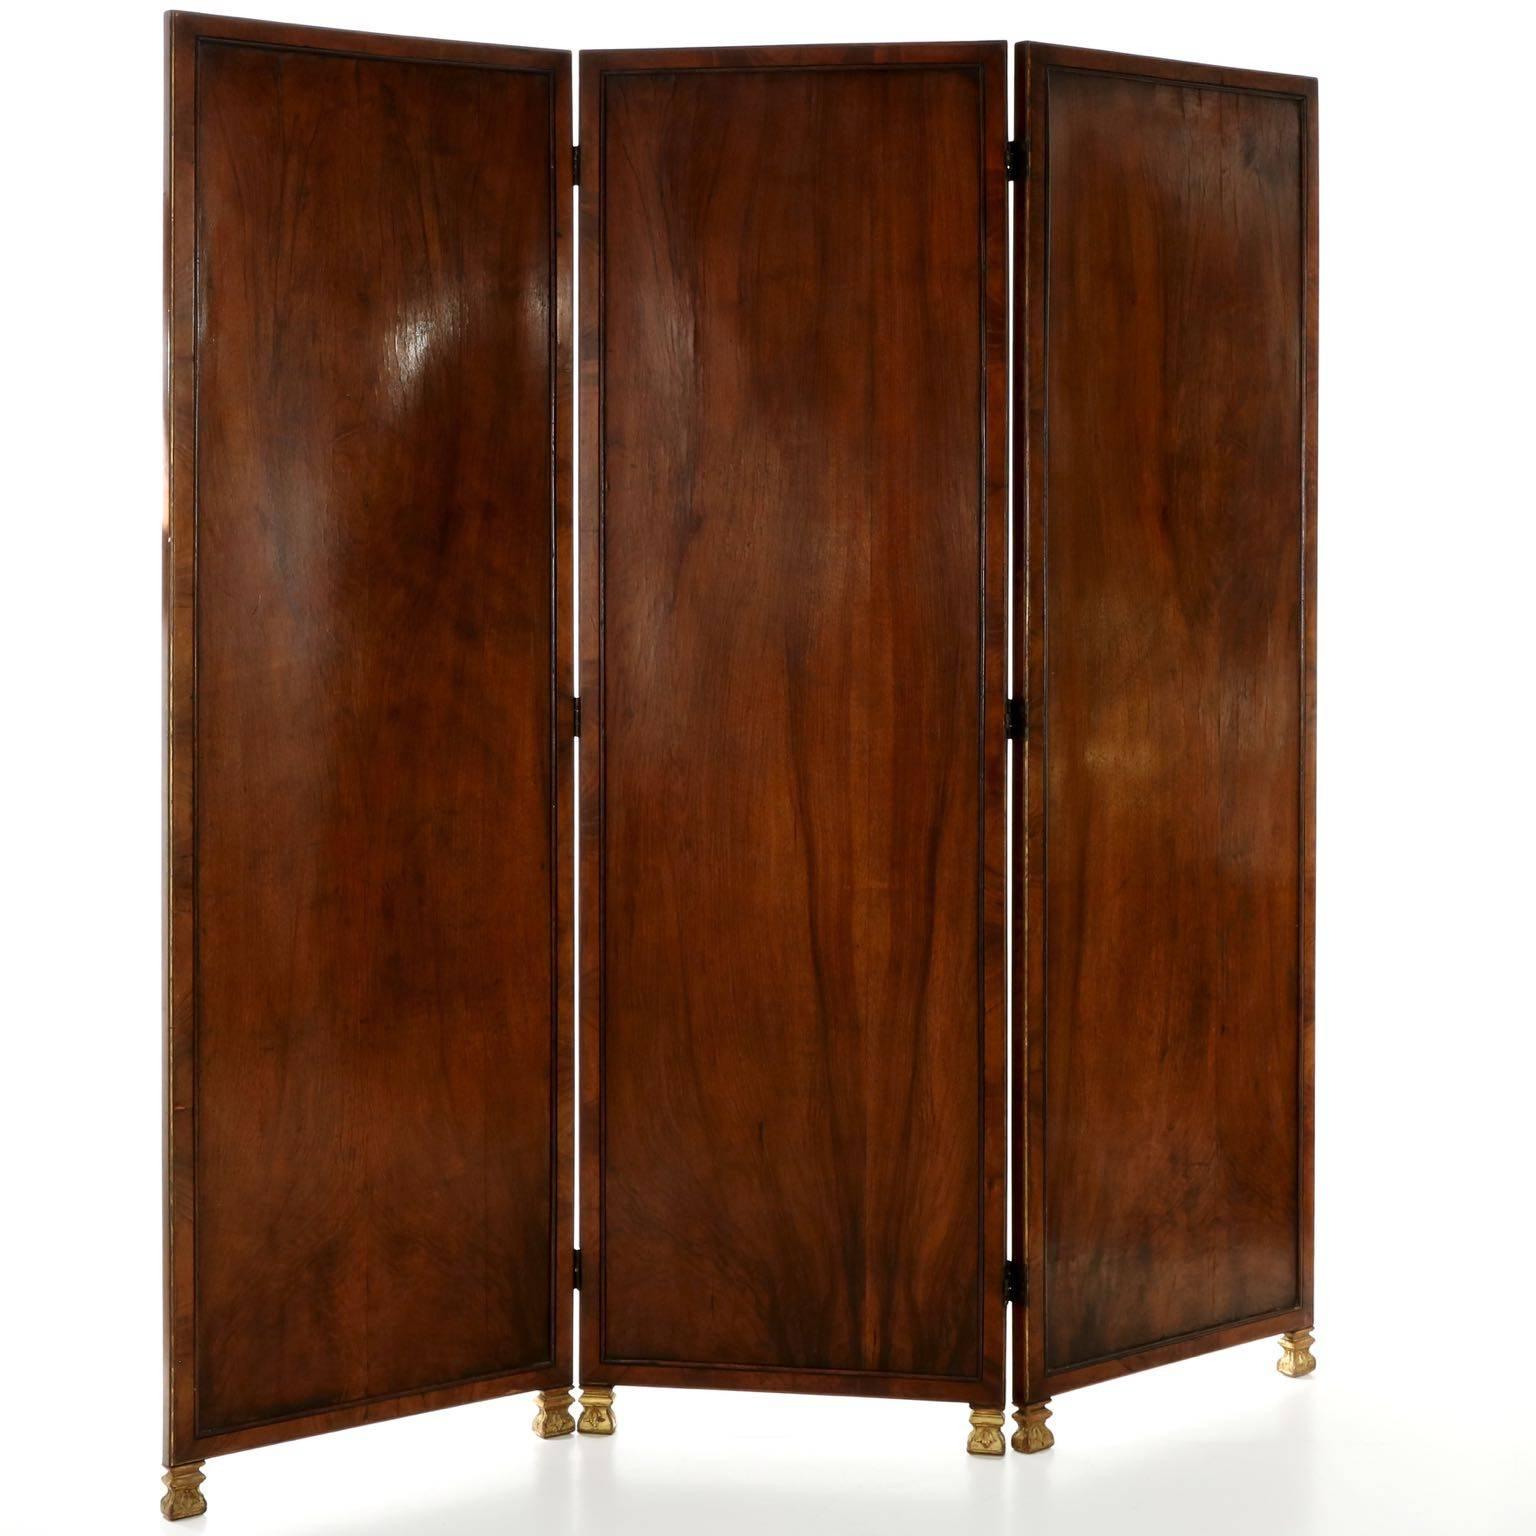 An unusual piece of very nice craftsmanship throughout, this room divider was designed in the English Regency taste, probably circa the last quarter of the 19th century. One side is rough and natural with the early woven burlap juxtaposed against